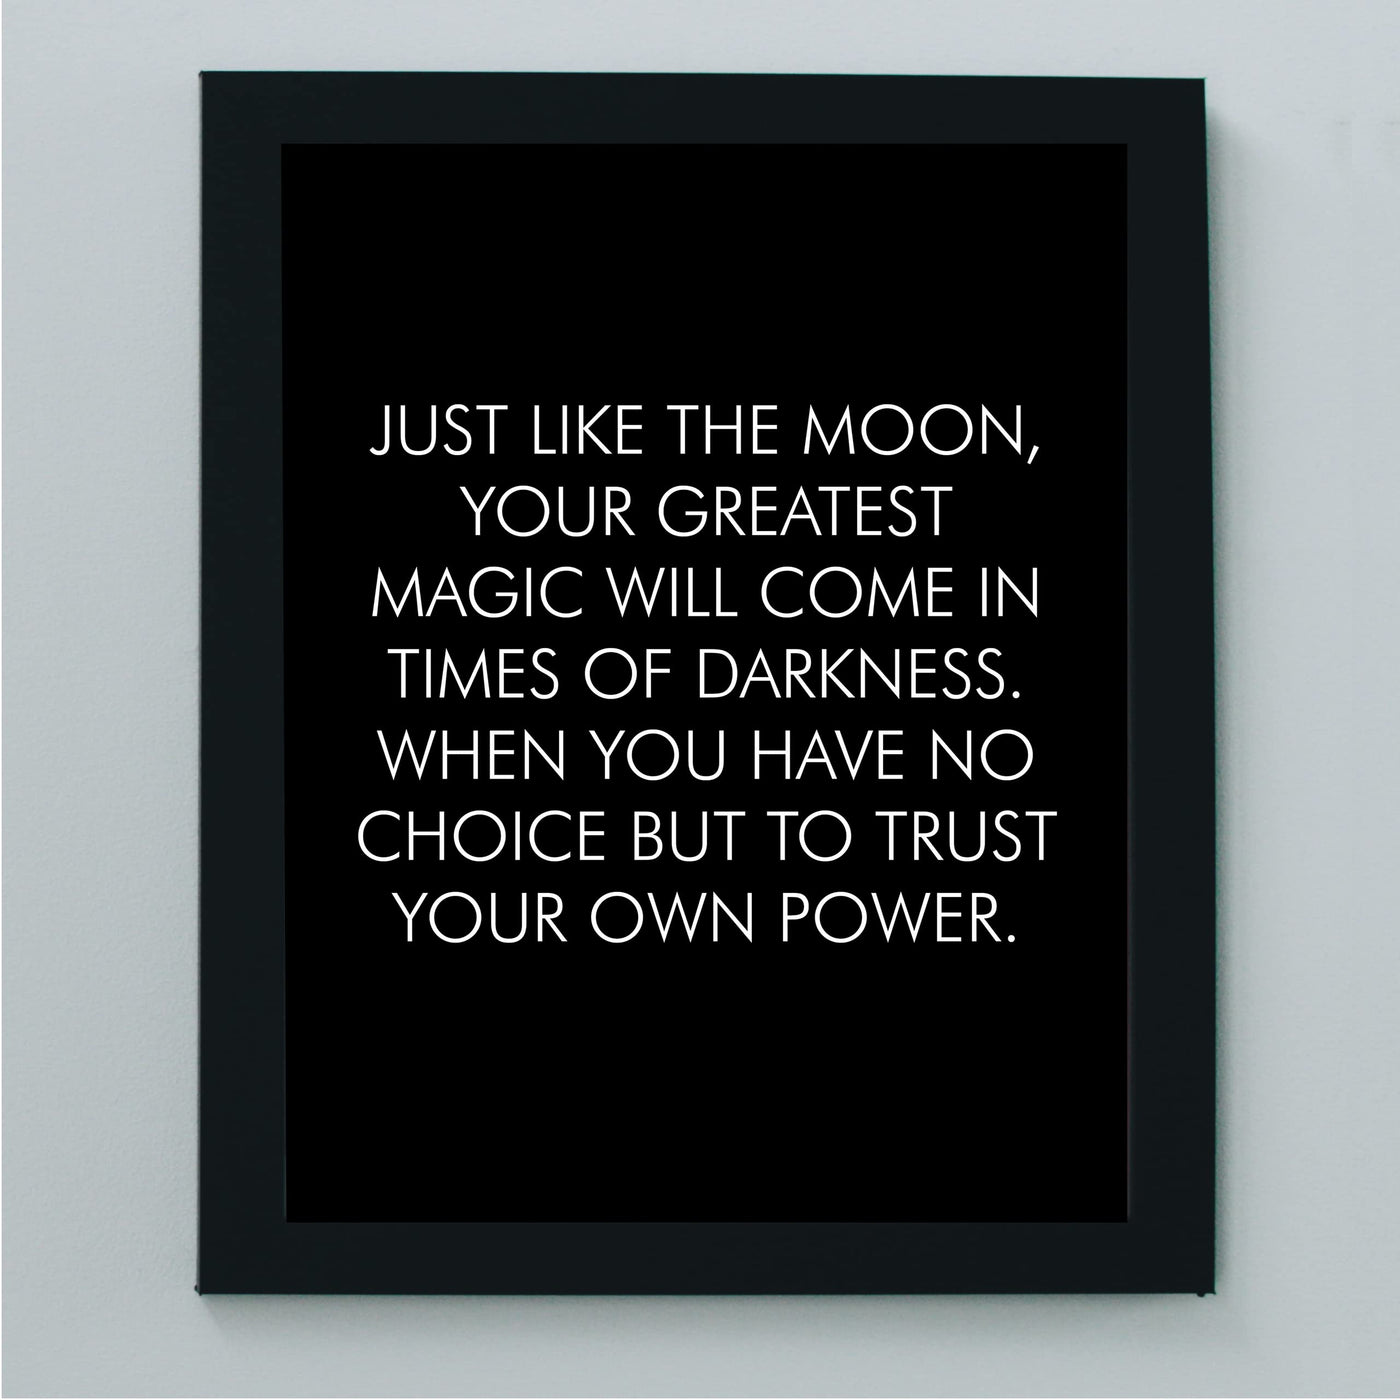 Your Greatest Magic Comes in Times of Darkness-Inspirational Wall Decor Sign -8 x 10" Motivational Art Print -Ready to Frame. Modern Home-Office-School-Dorm Decor. Great Gift for Inspiration!